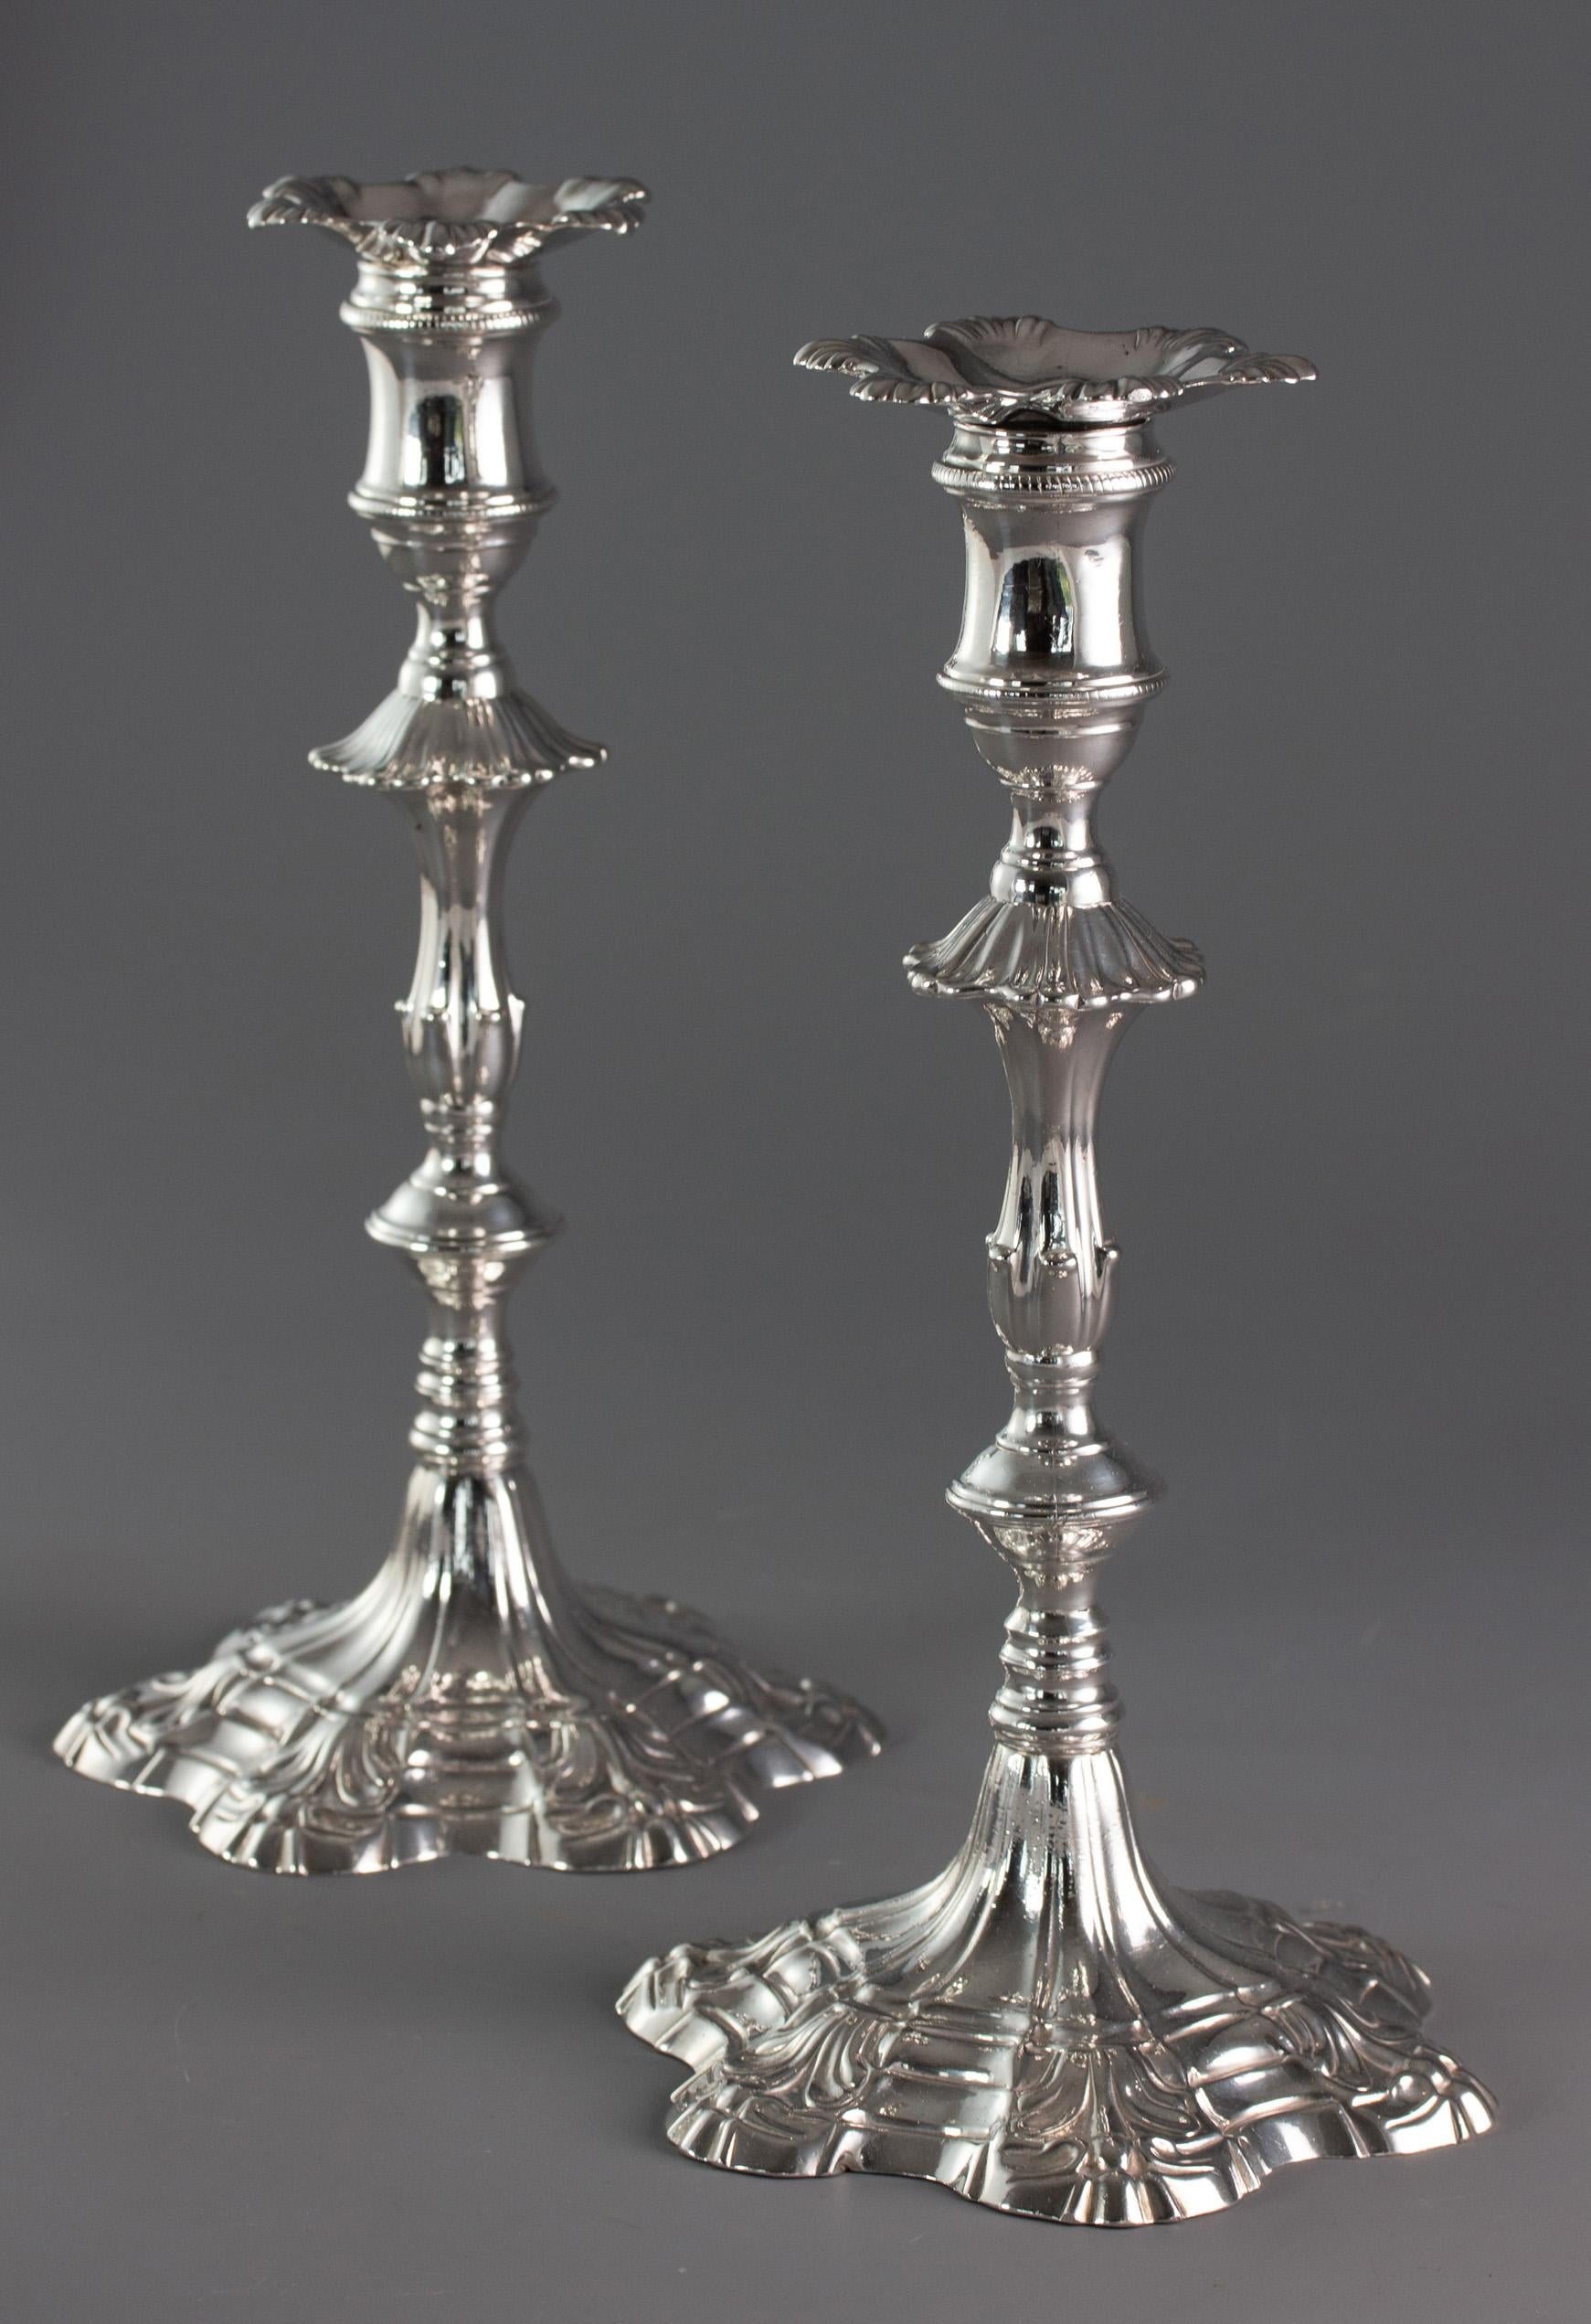 A pair of George III cast silver candlesticks, each with shaped hex foil, stepped and fluted bases rising to a knopped and fluted stem topped with a cotton-reel capitals and matched sconces.

Both candlesticks are clearly hallmarked for the